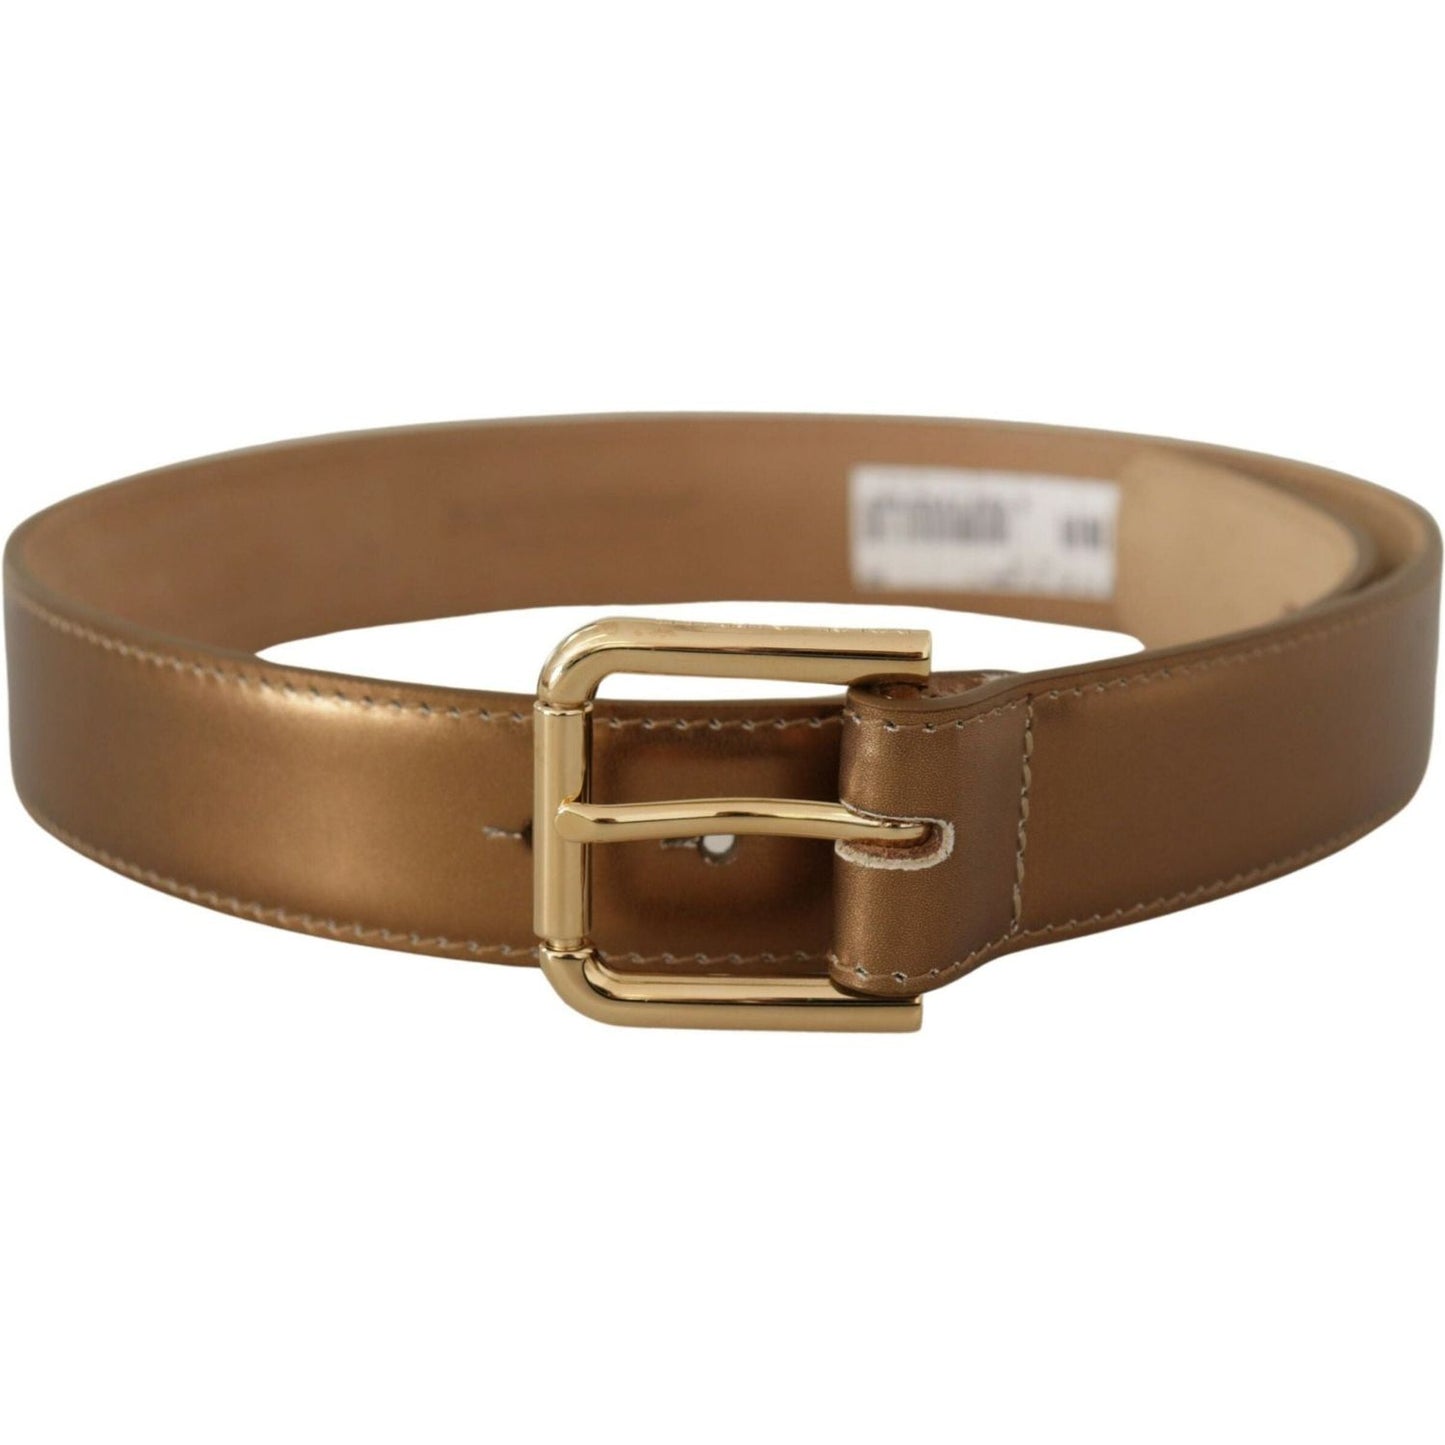 Dolce & Gabbana Bronze Leather Belt with Gold-Toned Buckle bronze-leather-gold-logo-engraved-waist-buckle-belt